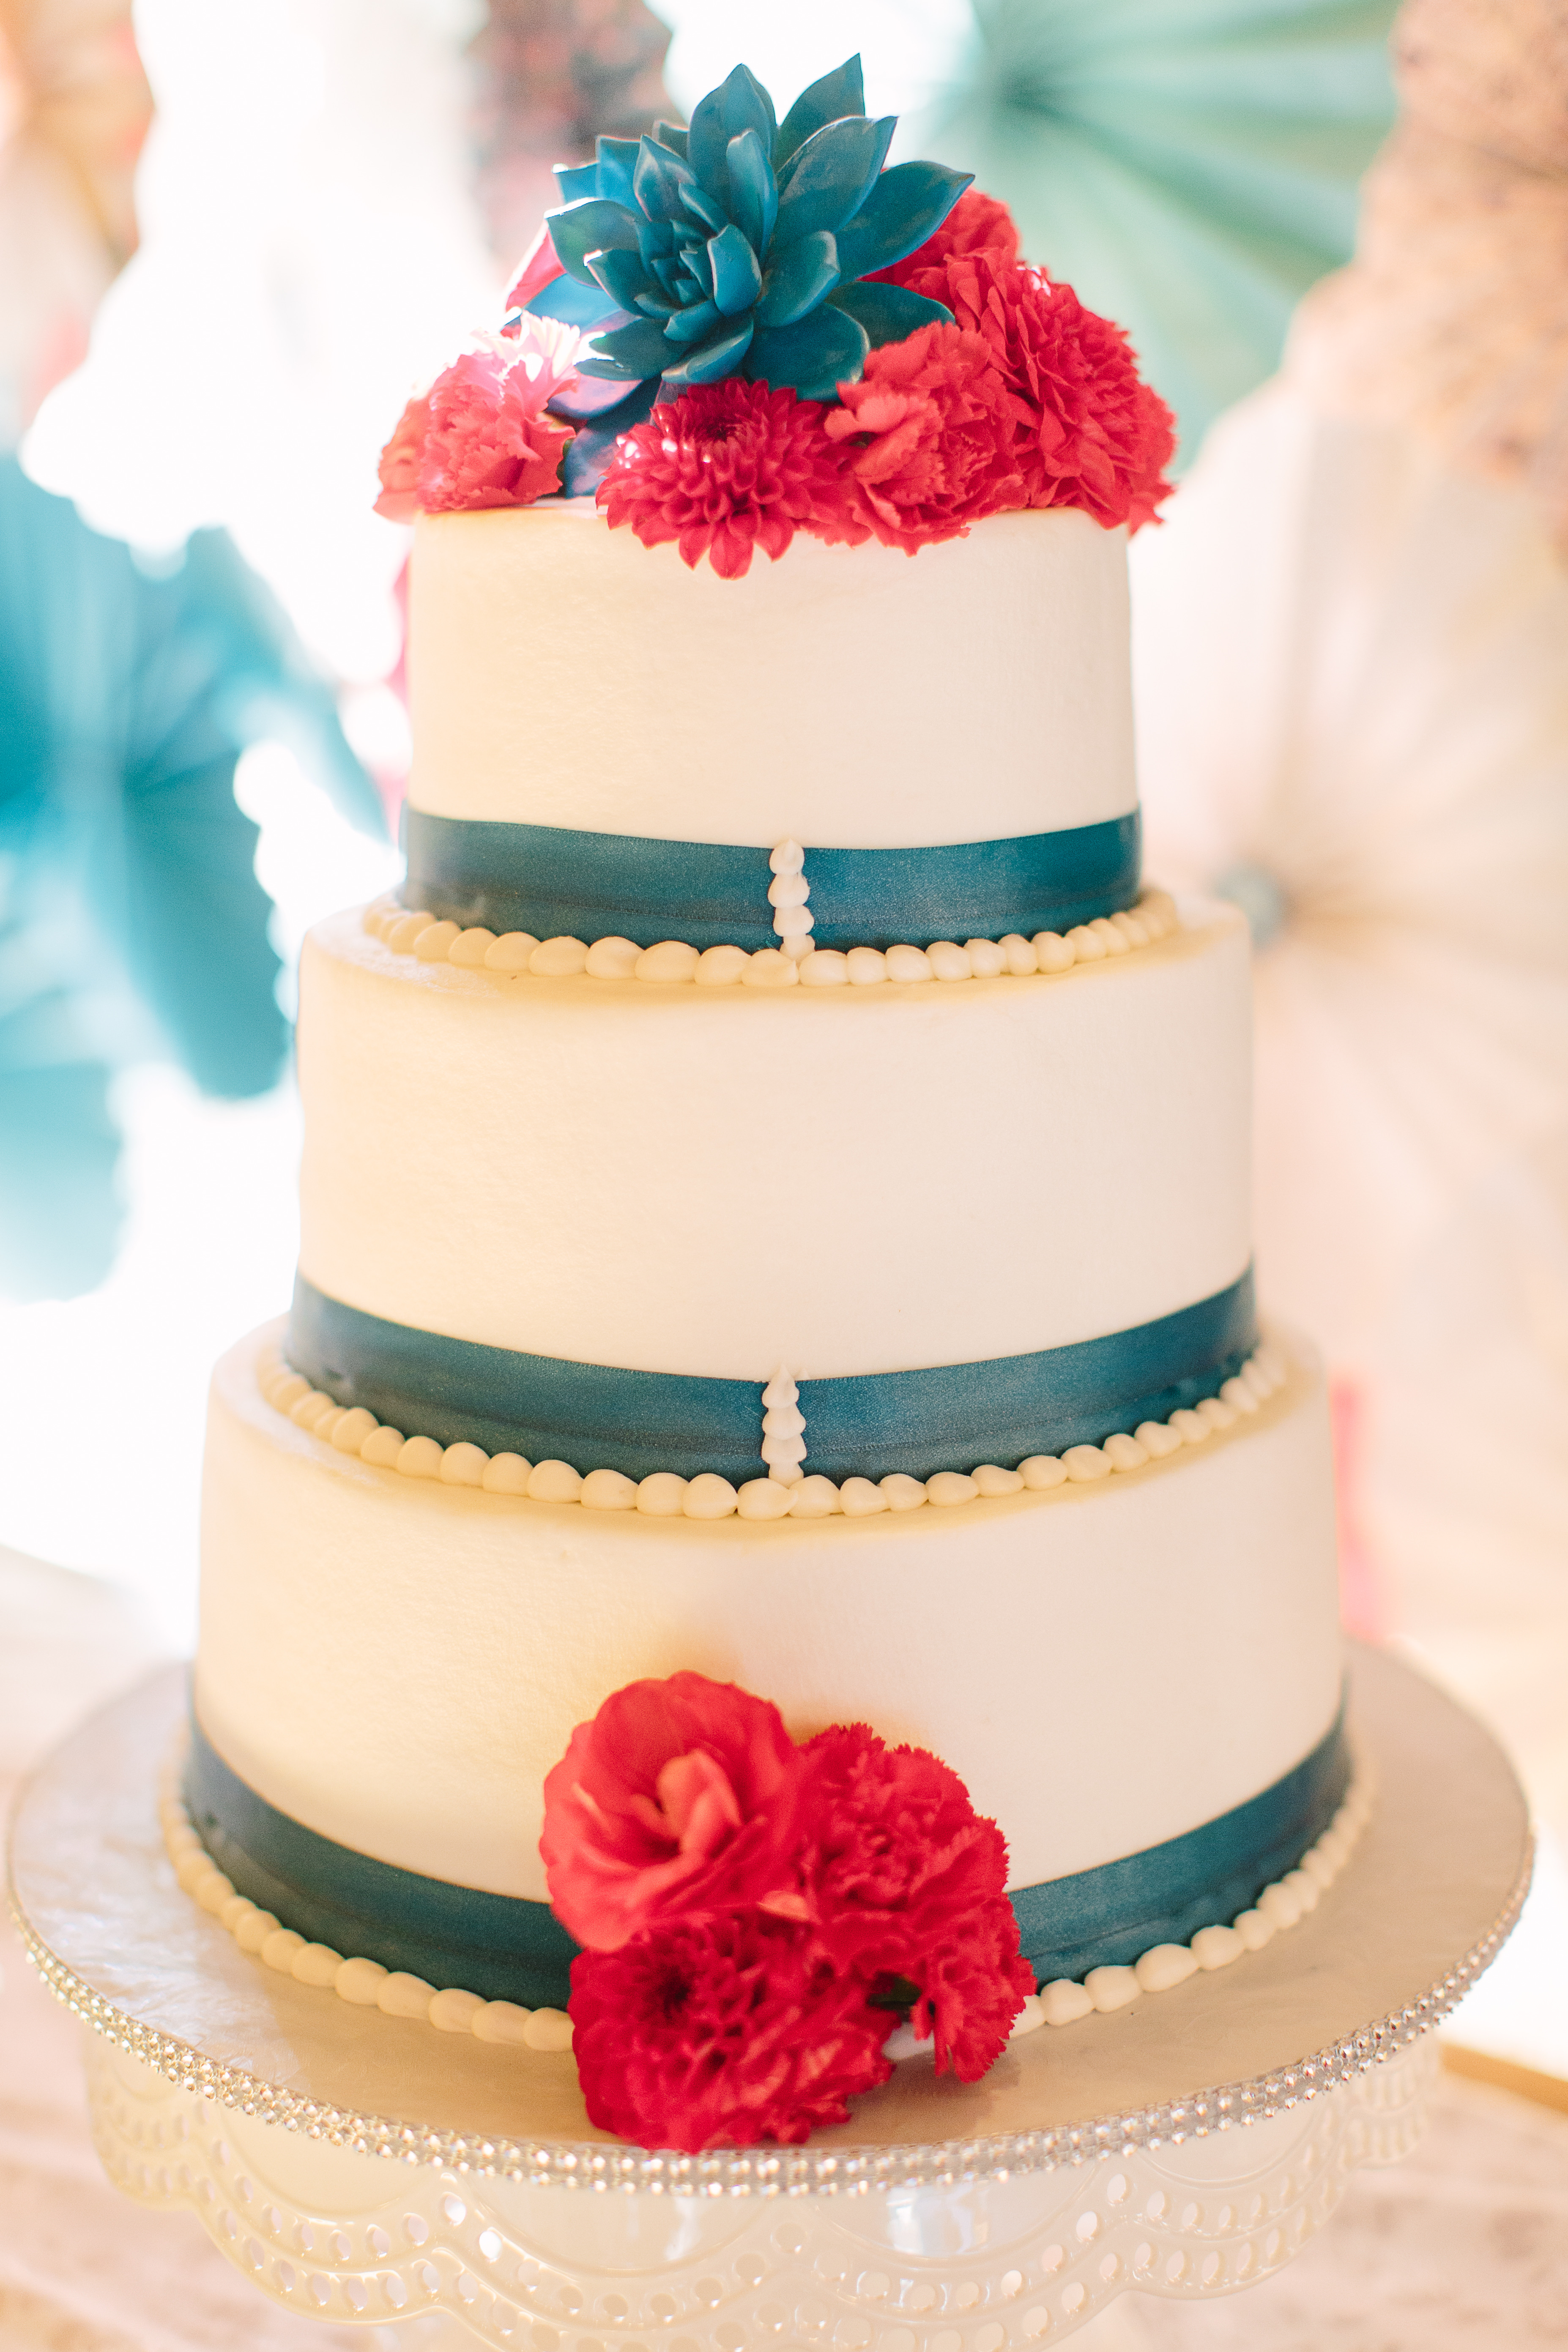 A 3-layer white buttercream wedding cake with teal ribbon, red flowers, and a teal succulent